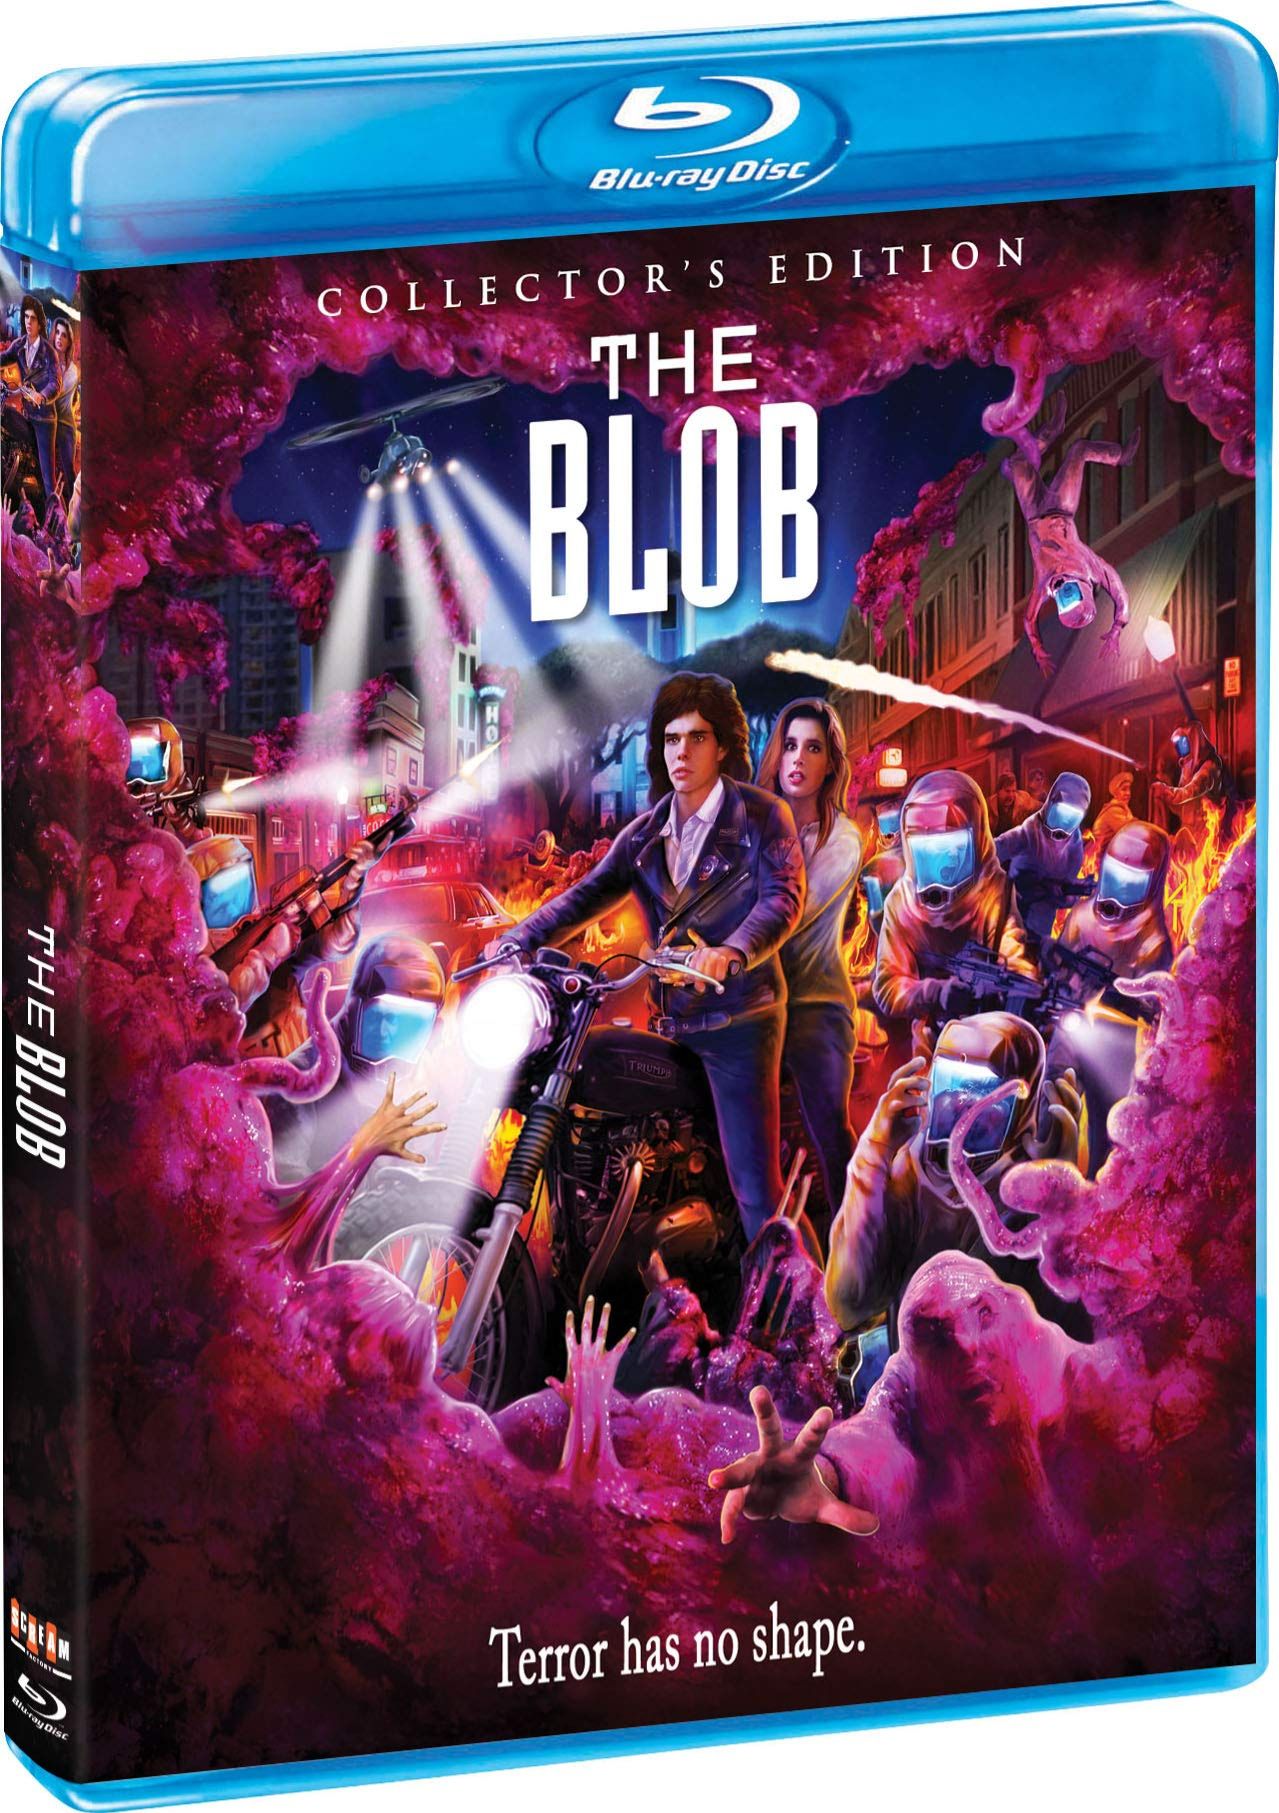 The Blob (1988) Collector's Edition Blu-ray